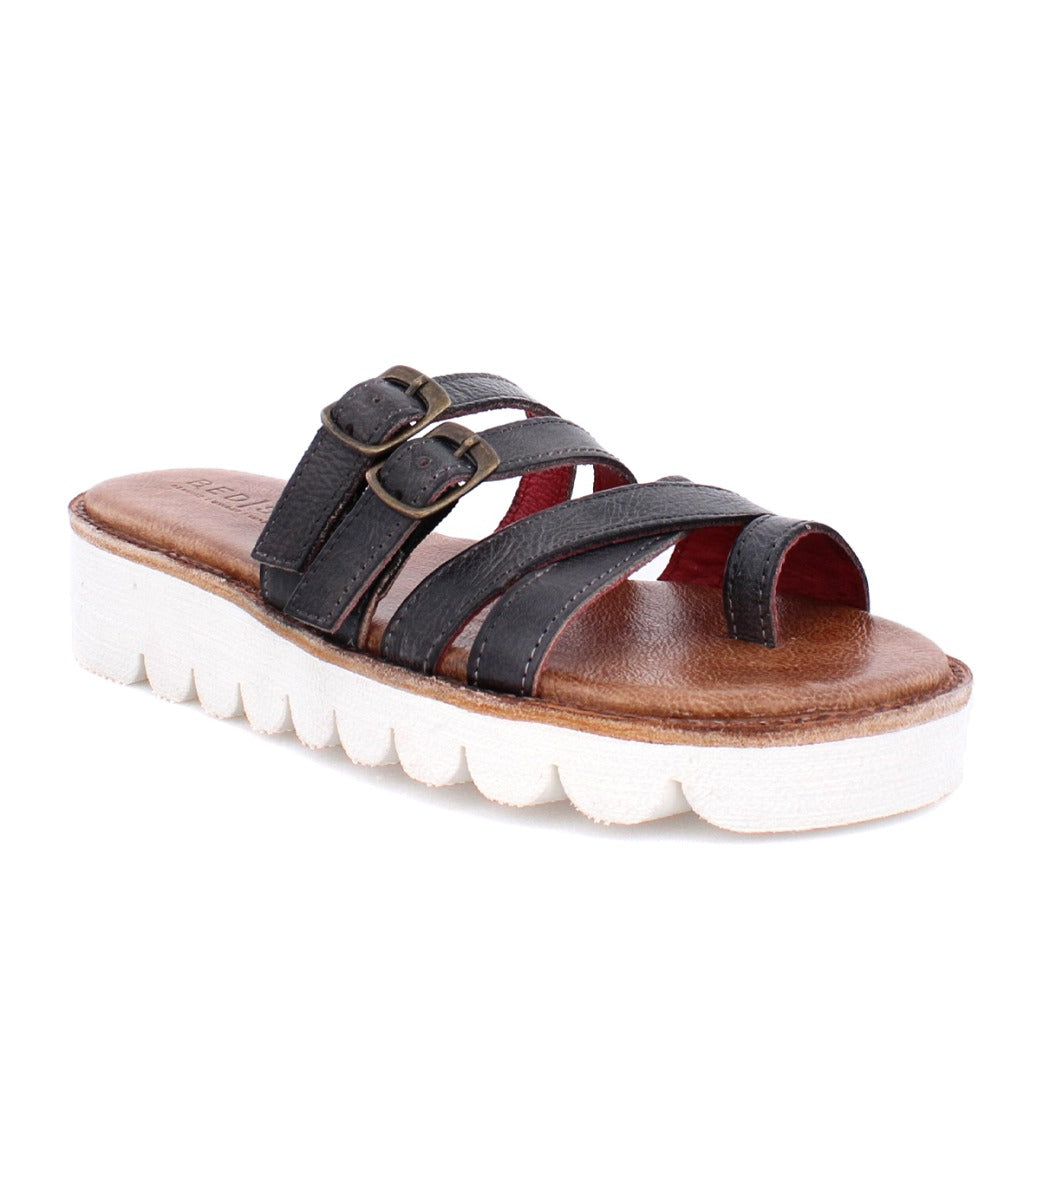 A women's black Holland sandal with two straps and a white Bed Stu sole.